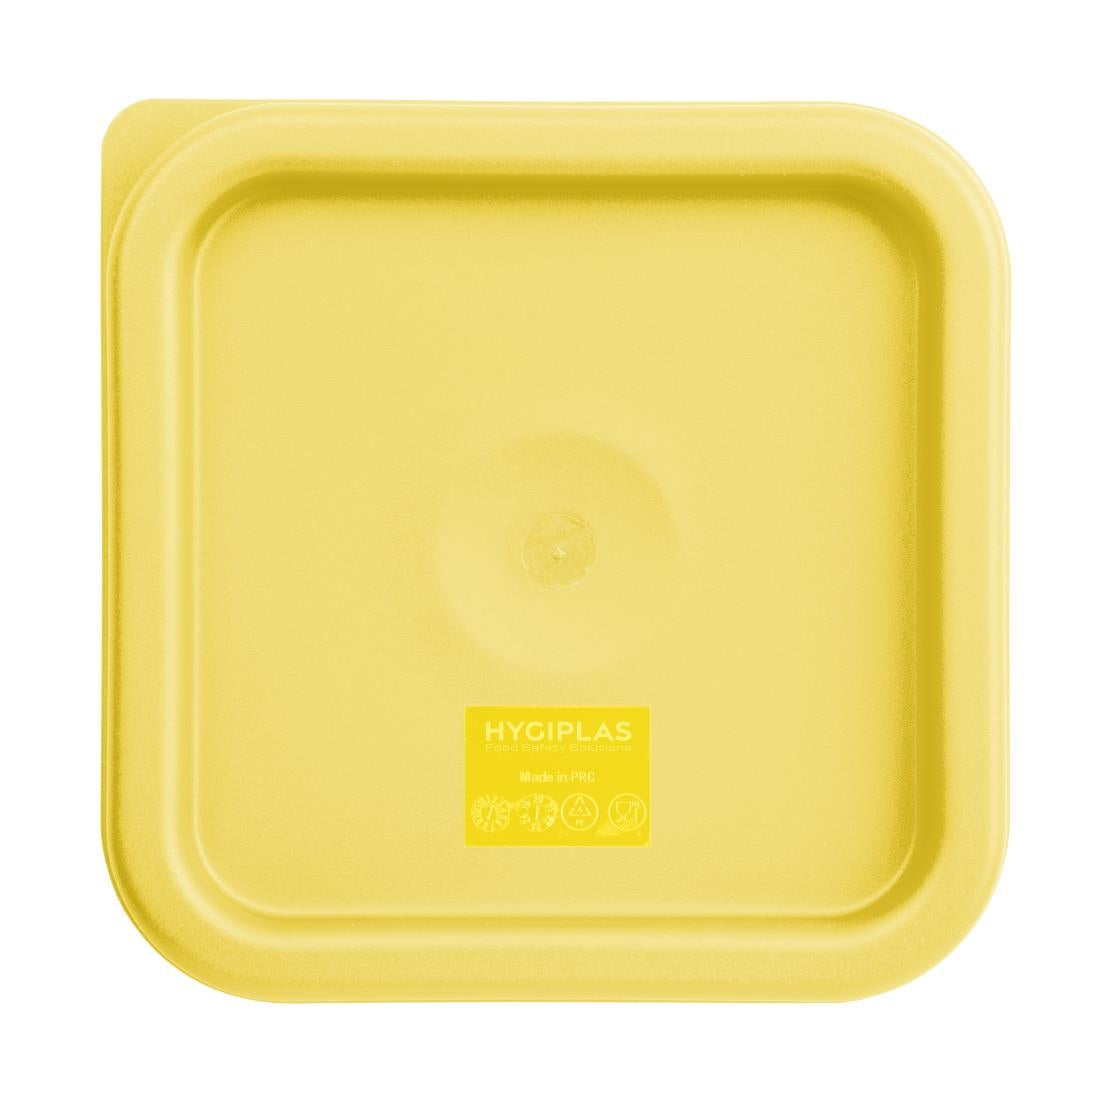 FX137 Hygiplas Square Food Storage Container Lid Yellow Small